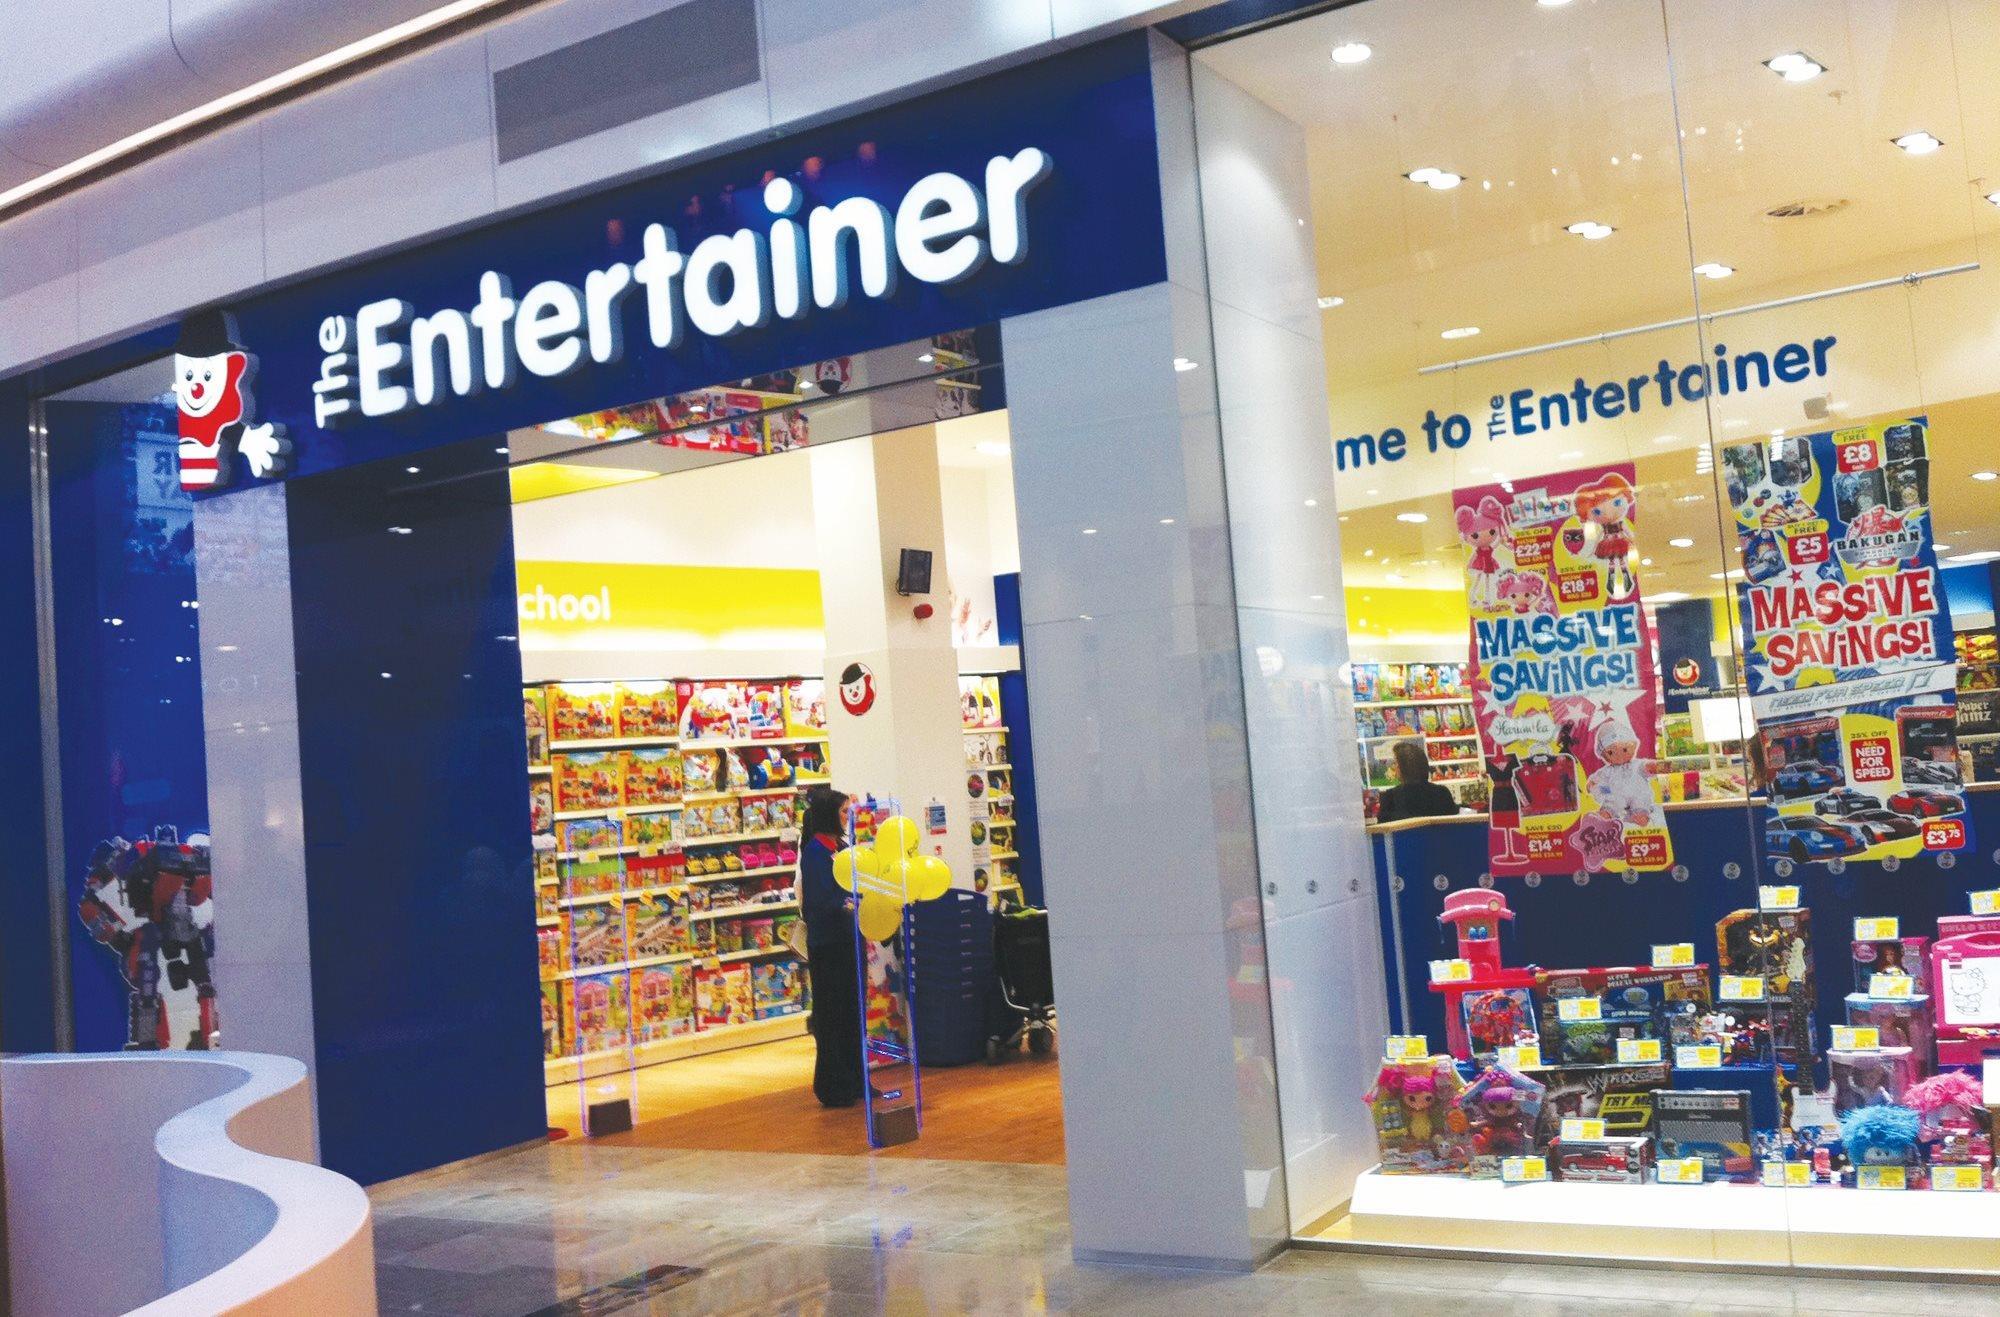 the entertainer store